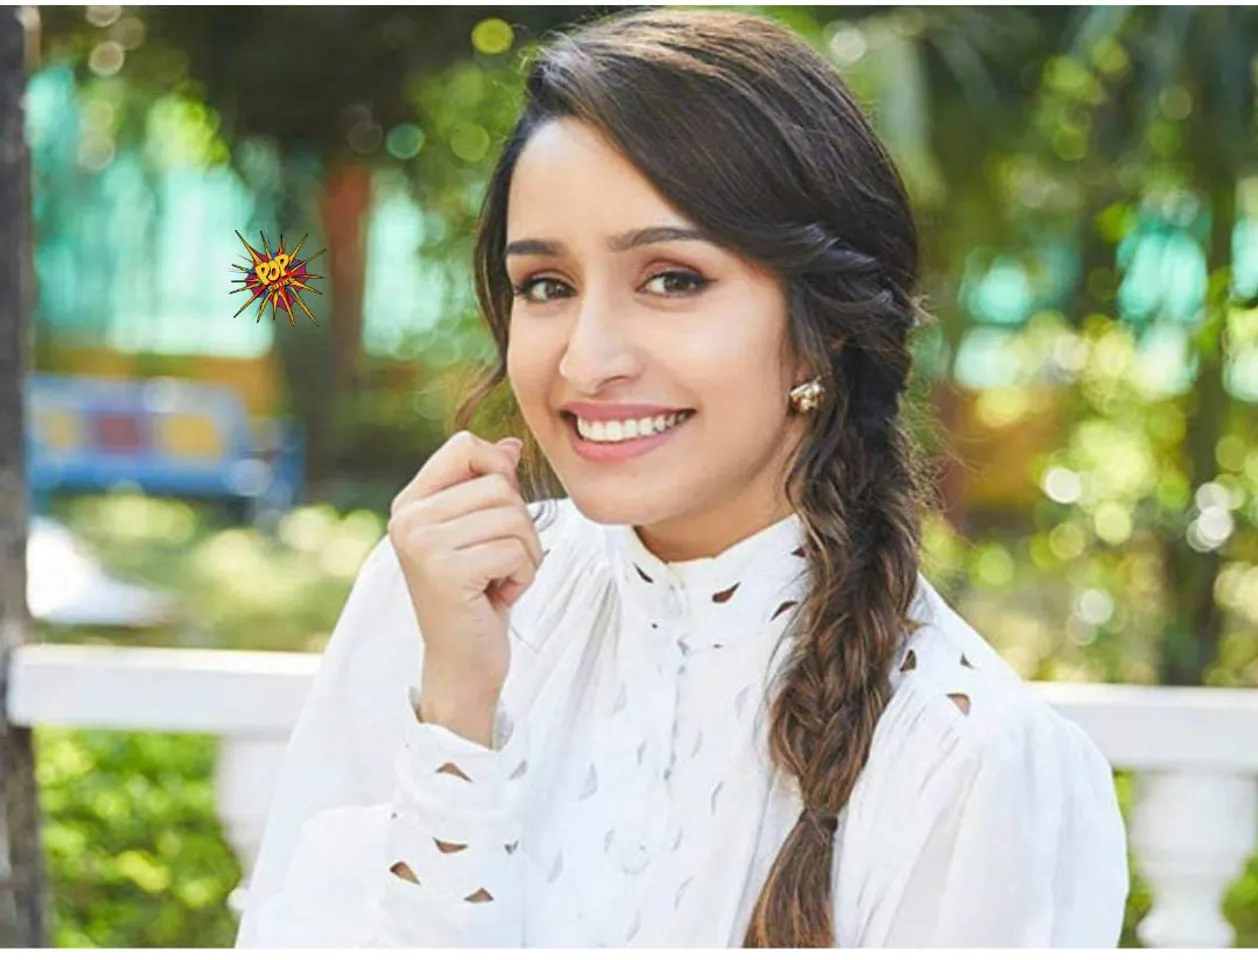 Shraddha Kapoor's craze boosts on social media by becoming the second most followed Indian actress on Instagram, crossing 70 Million followers